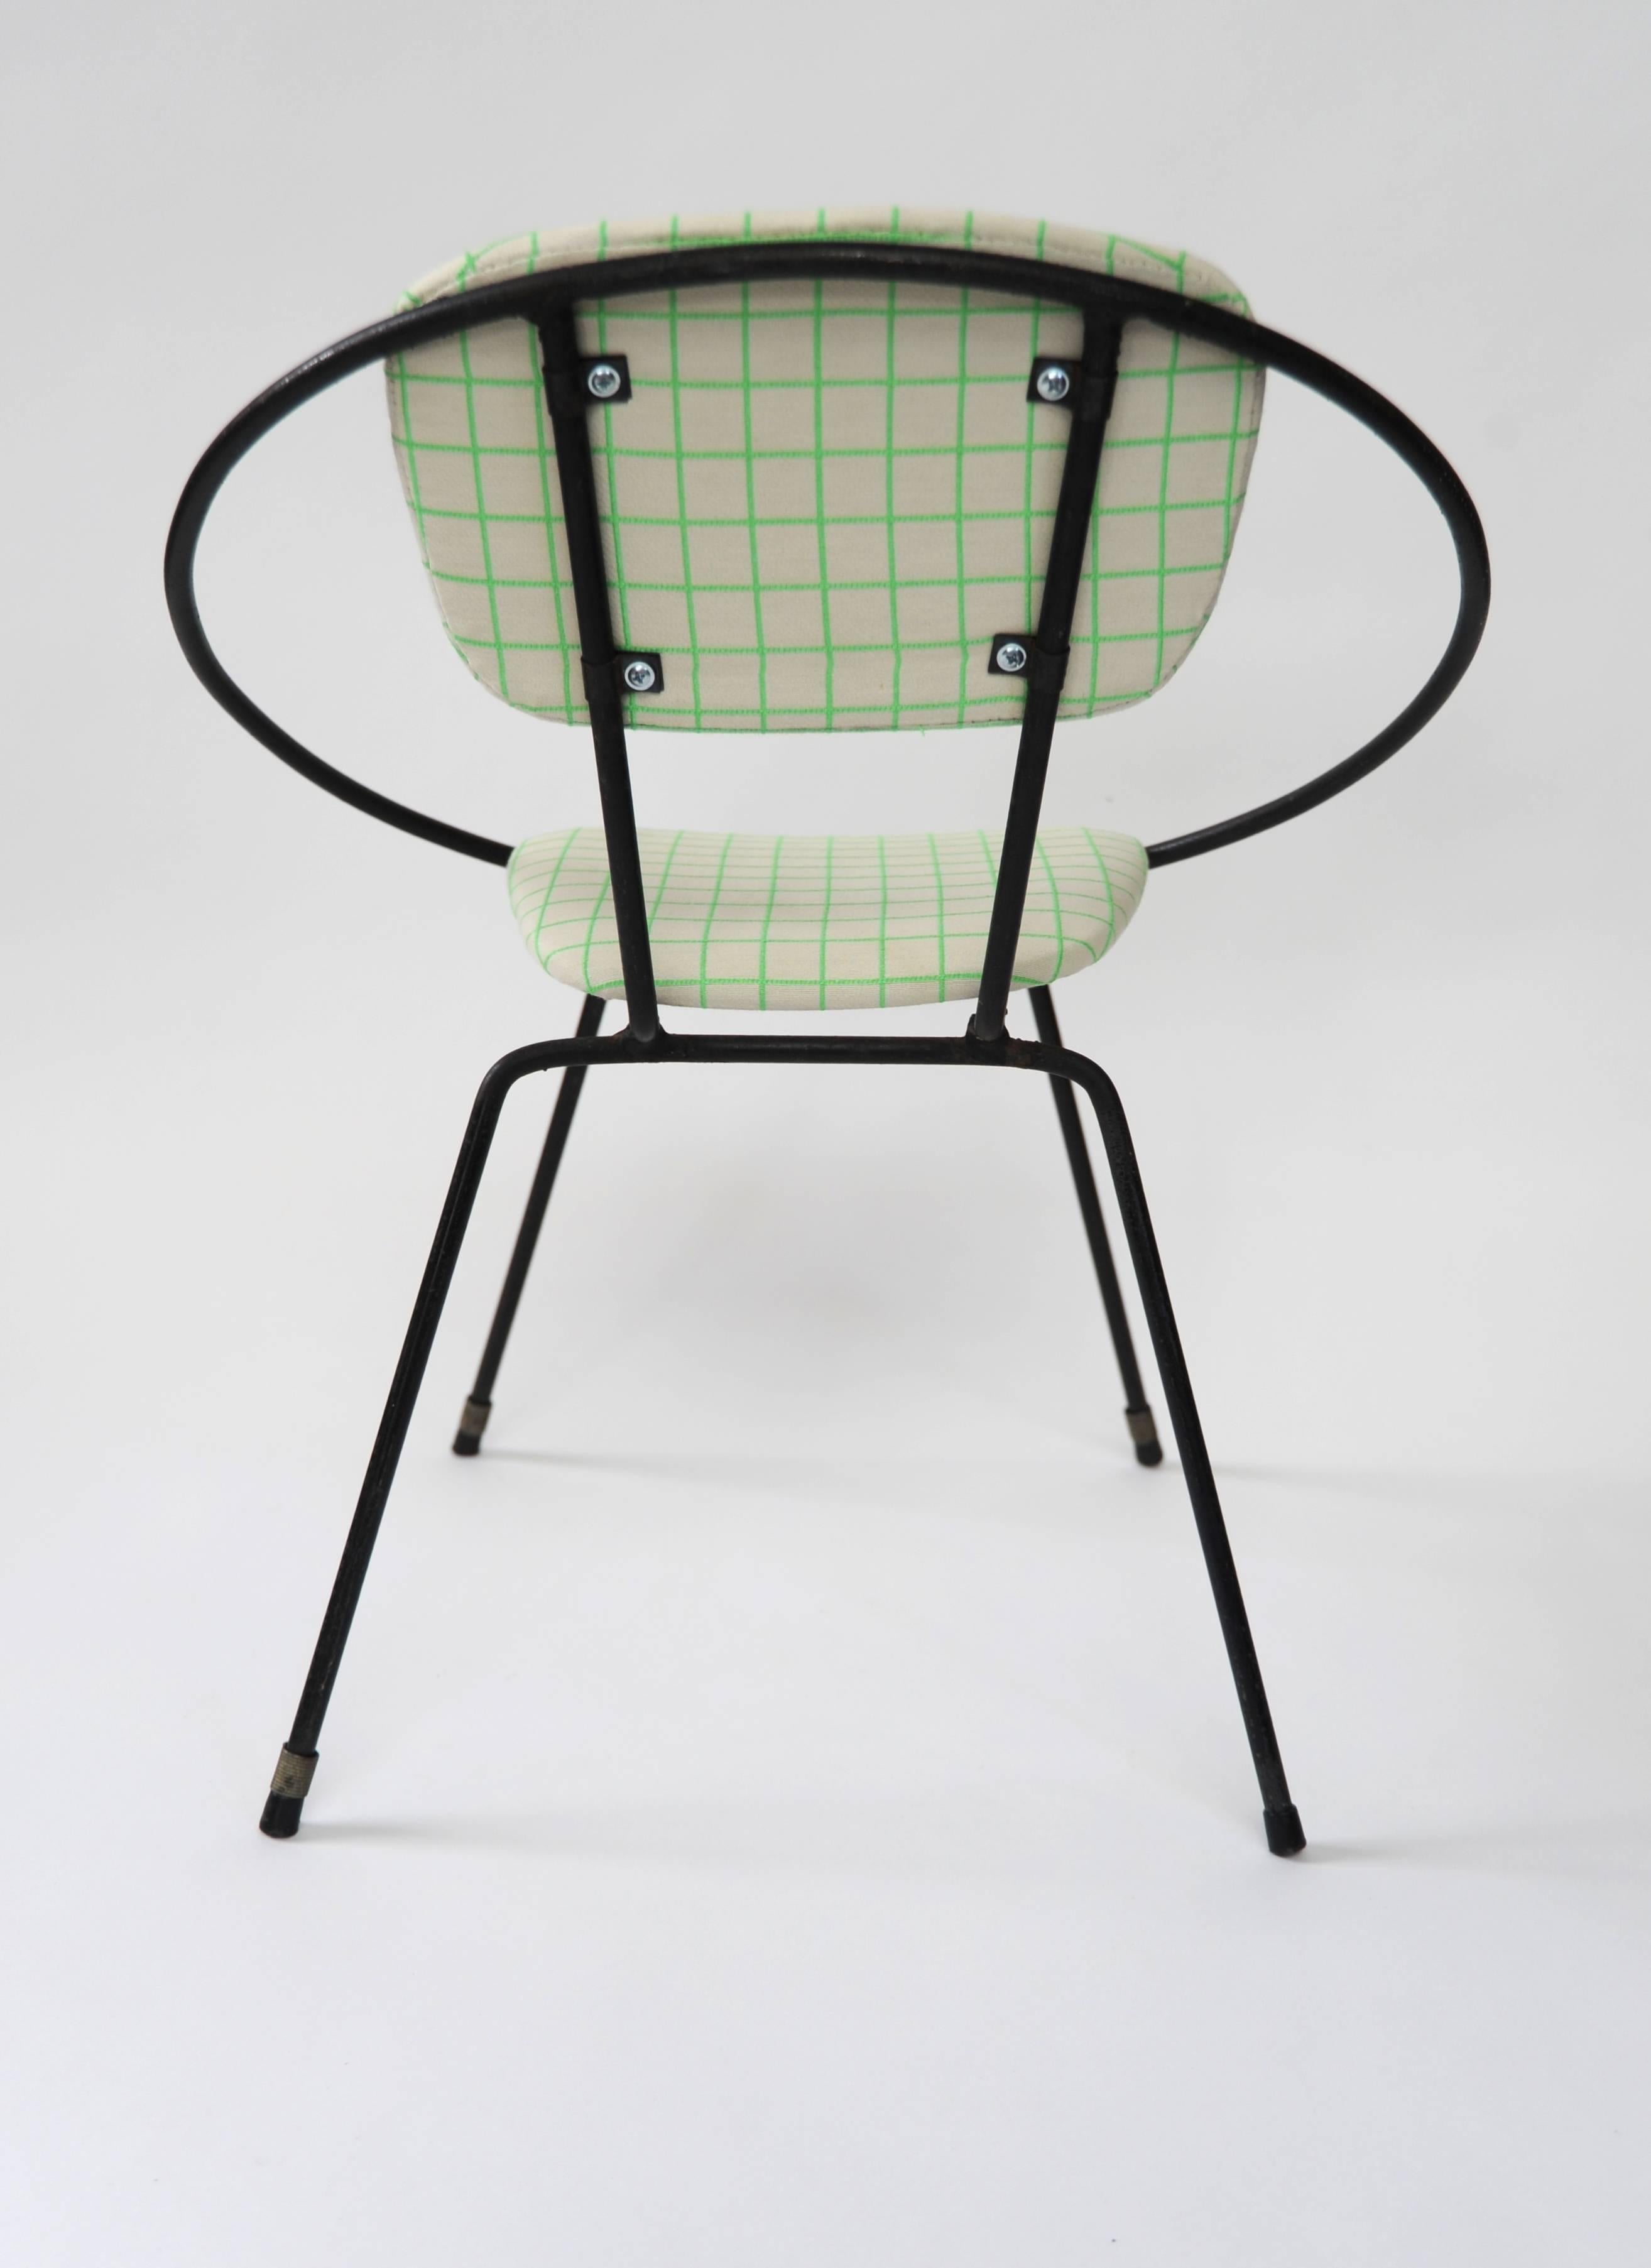 Pair of 1950s Iron Circle Chairs with Contemporary Maharam Fabric (Moderne der Mitte des Jahrhunderts) im Angebot